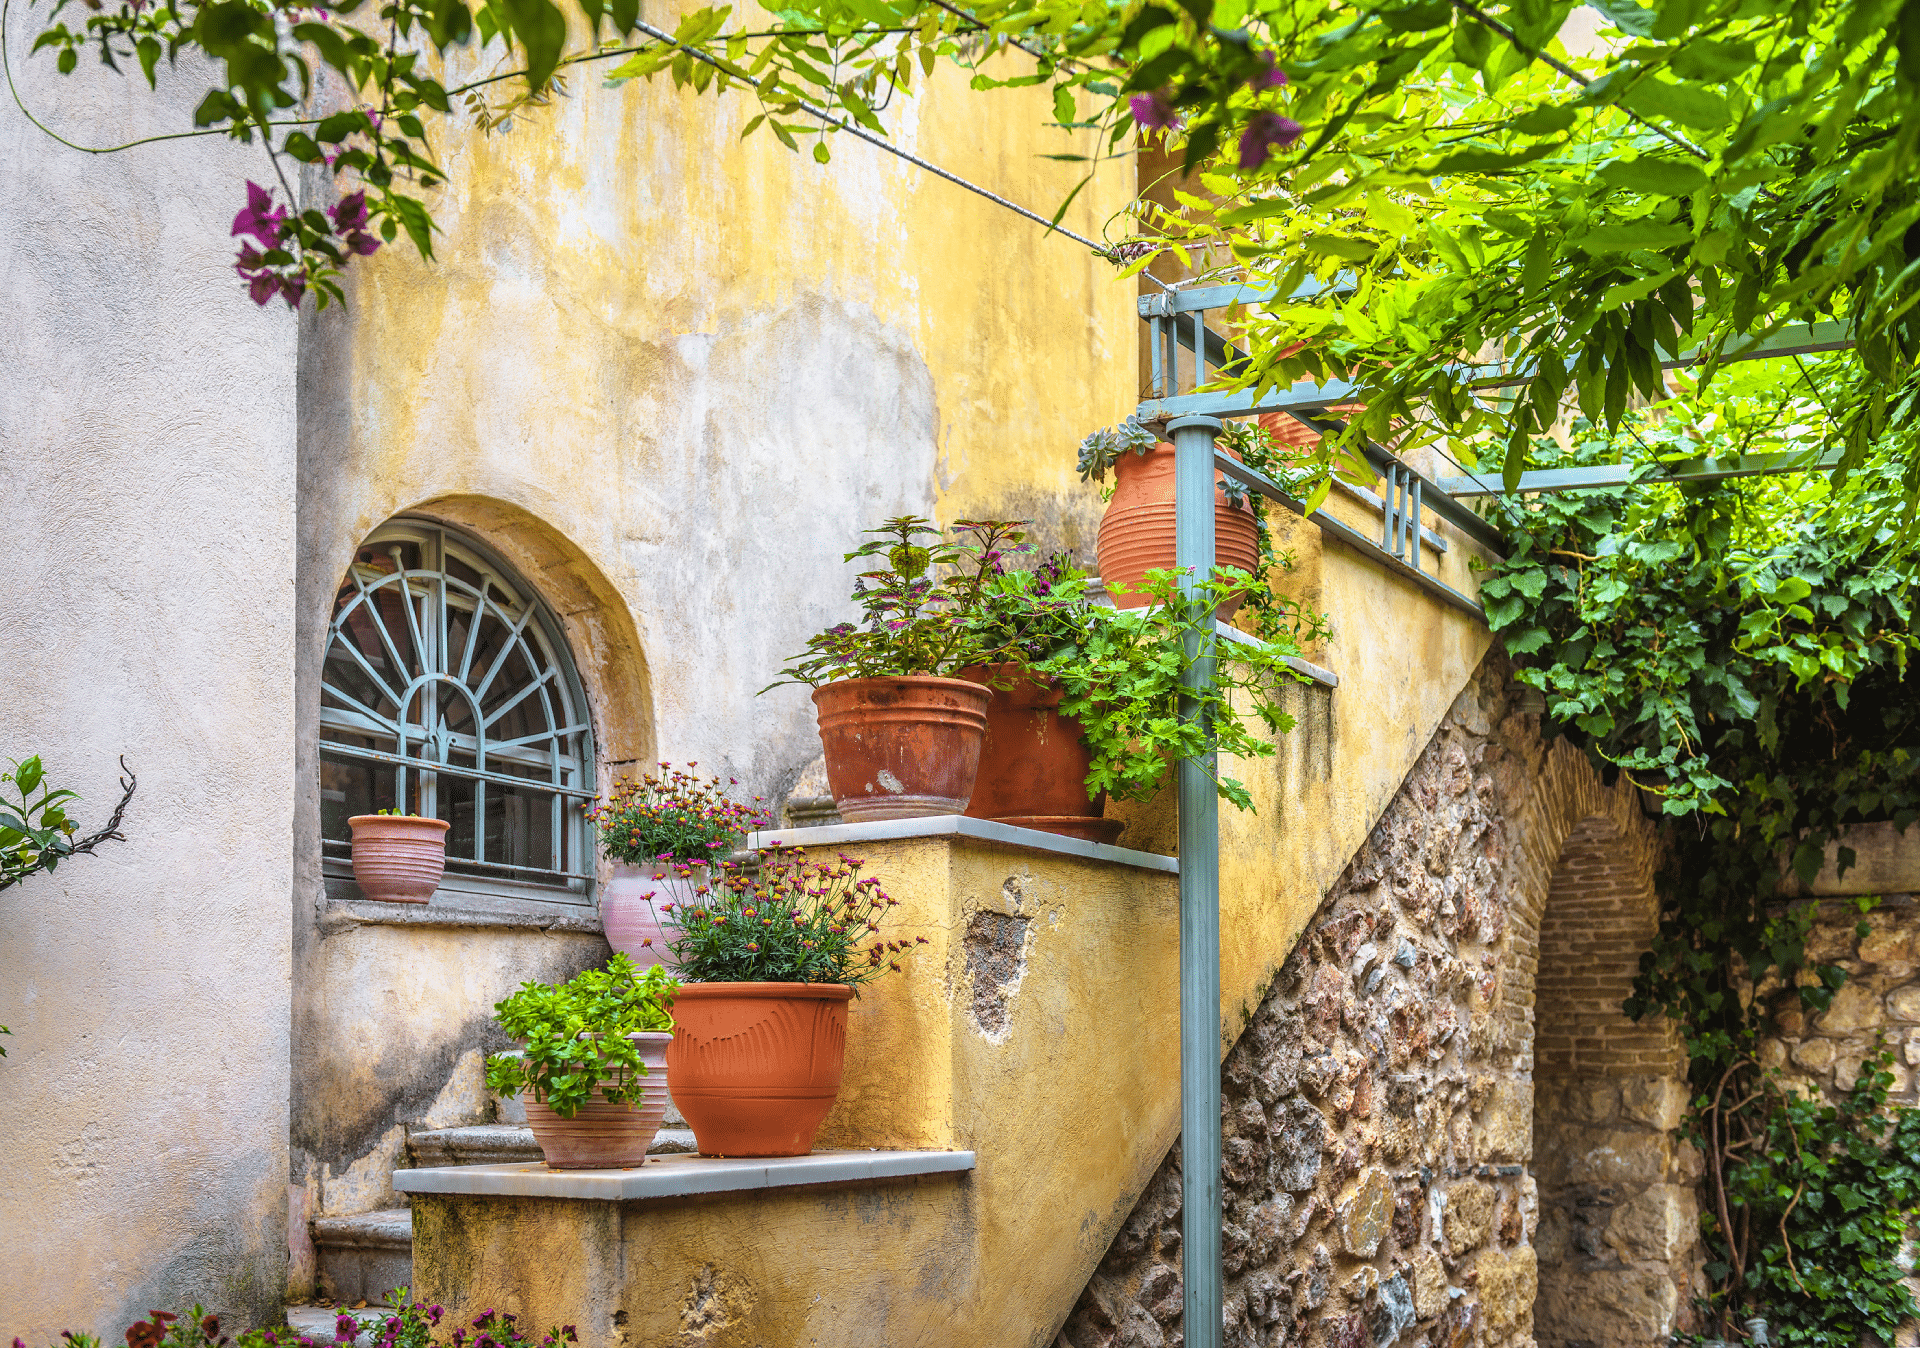 The colourful houses of Plaka district, where ESSE boutique hotel Athens near the Acropolis is located.